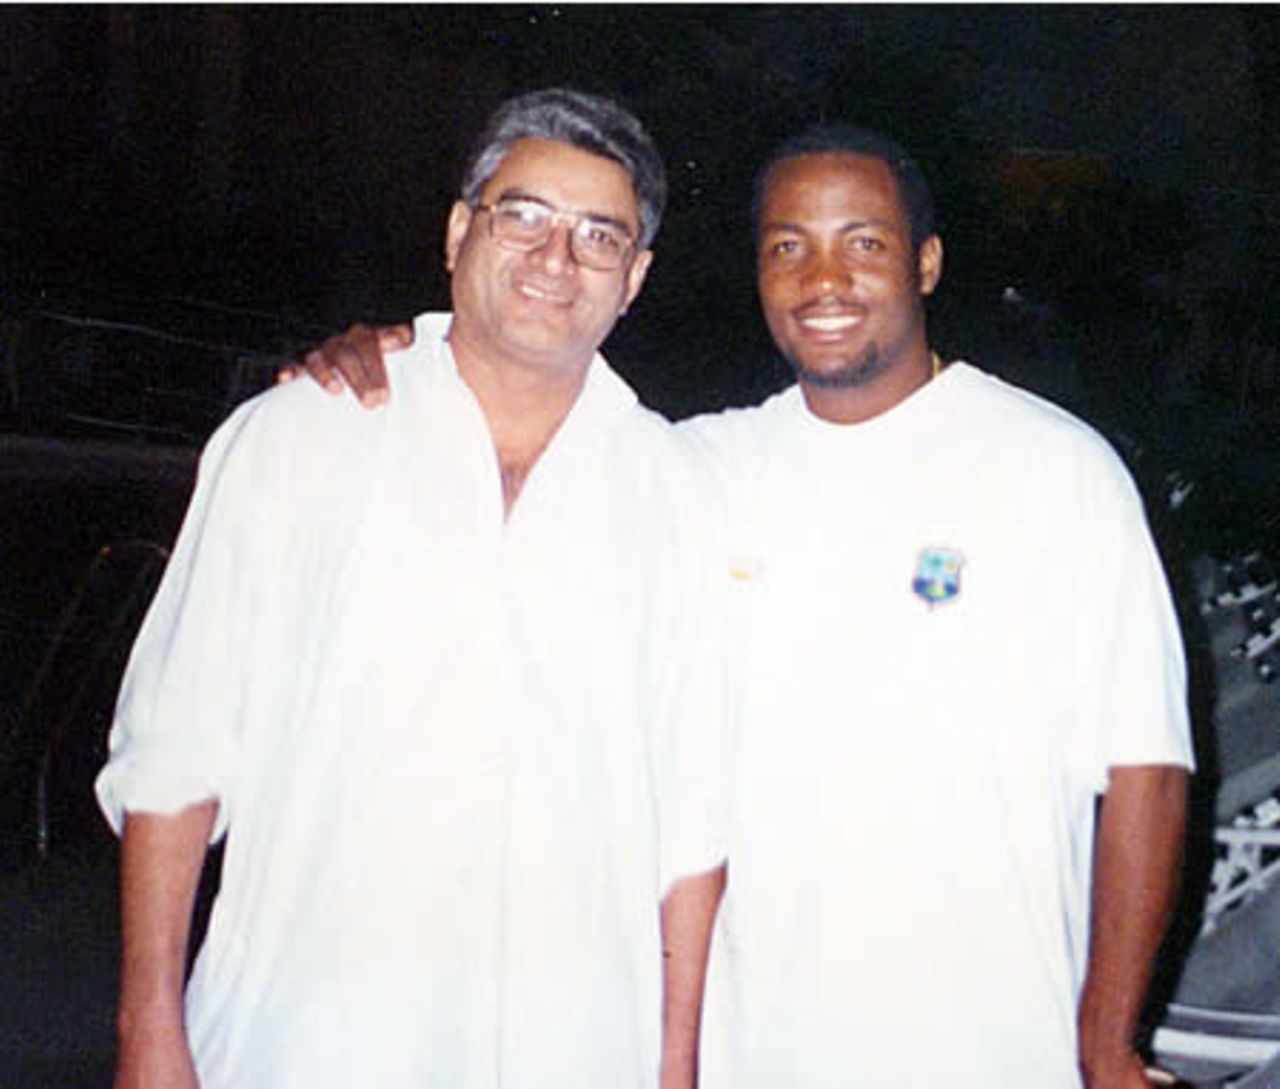 Brian Lara with Azhar Zaidi - during the West Indies tour, 1997-98